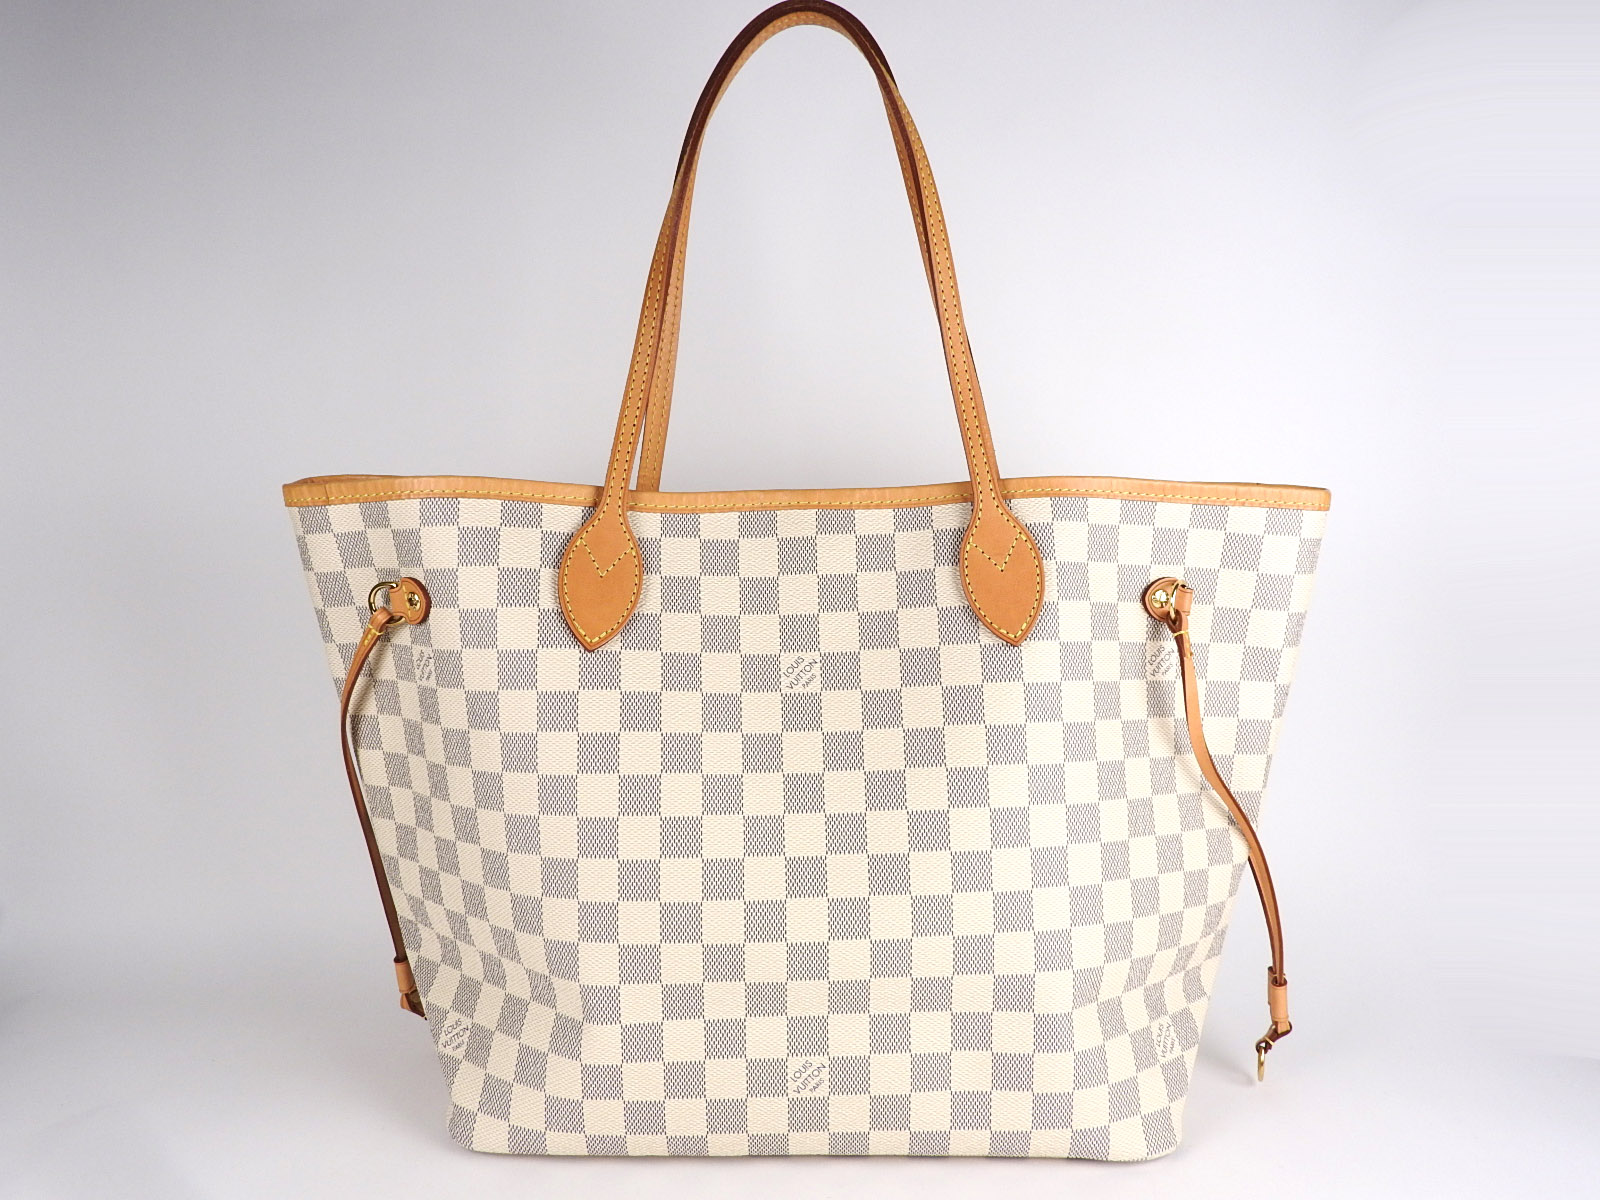 LOUIS VUITTON Neverfull MM Damier Azur Shoulder Tote Bag With Pouch N41361 V2171 | eBay